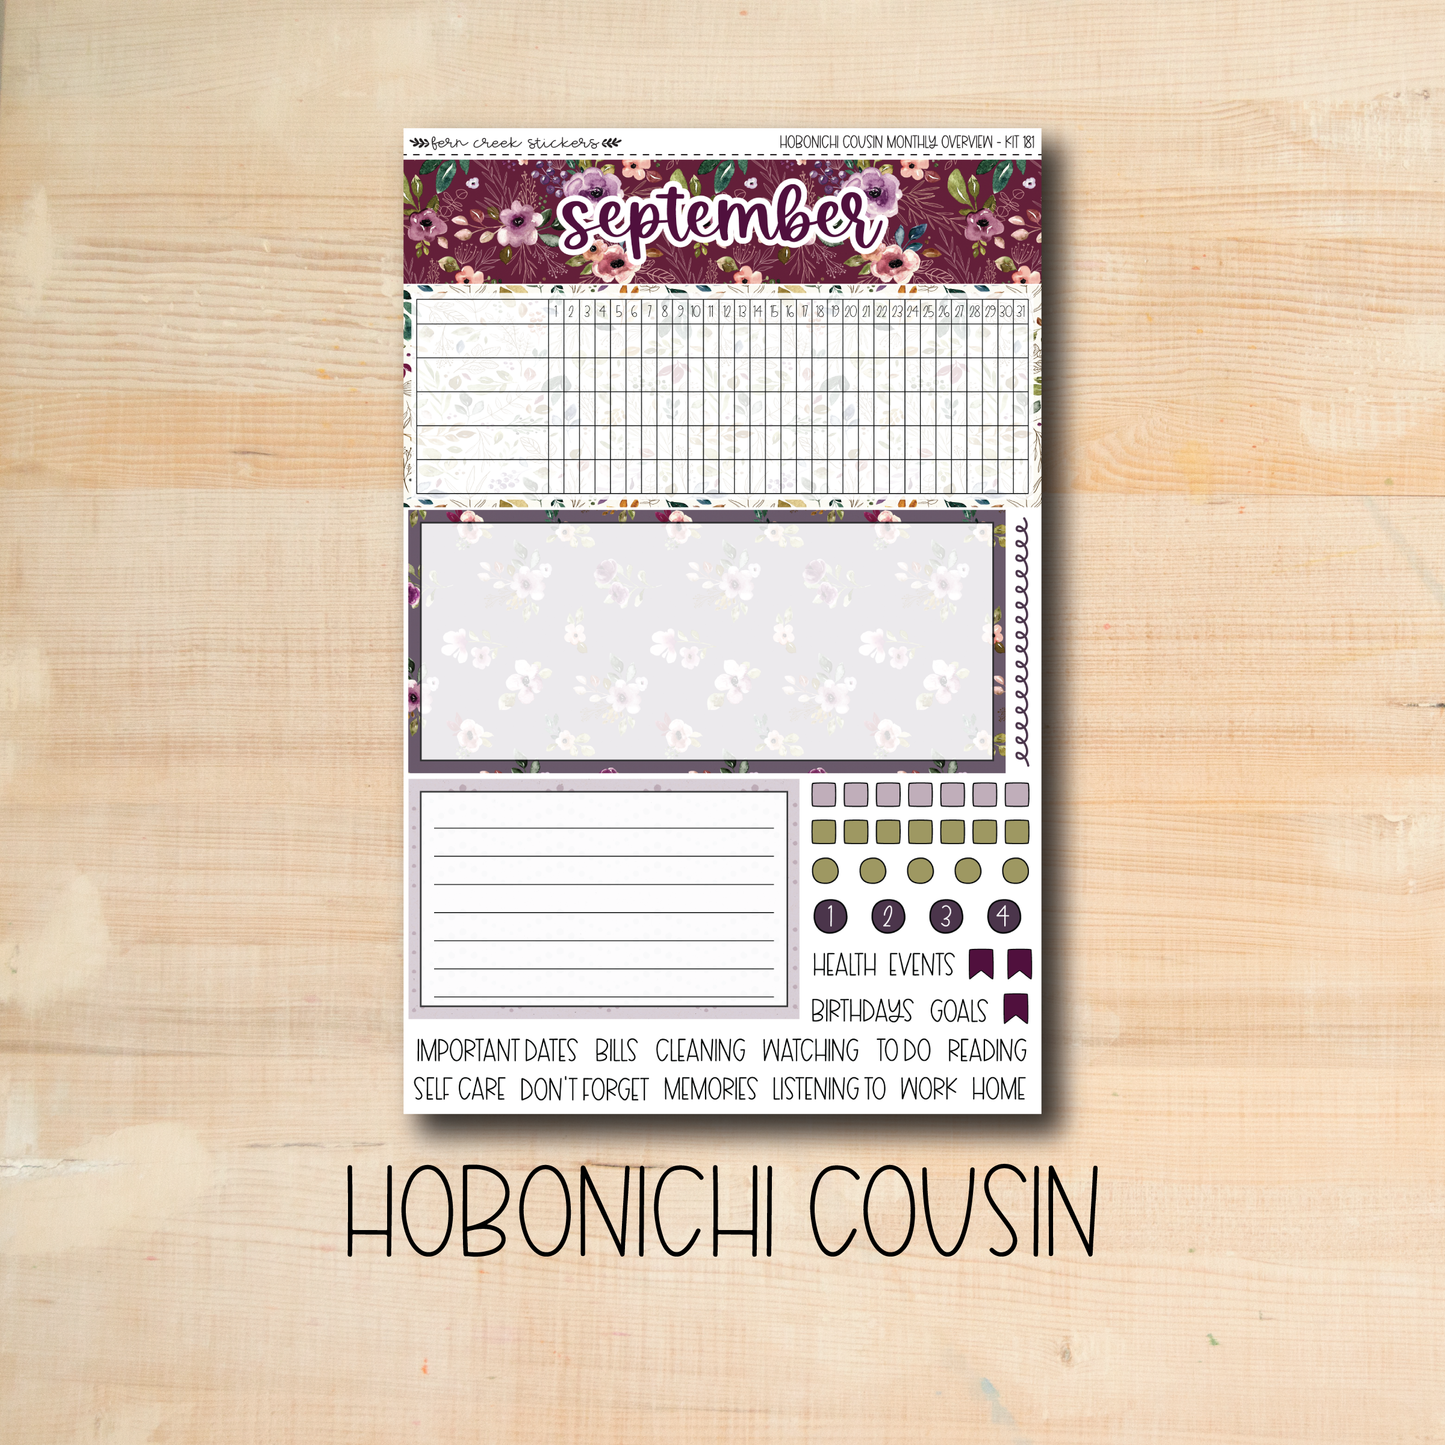 HCMO-181 || AUTUMN AMETHYST September Hobonichi Cousin monthly overview